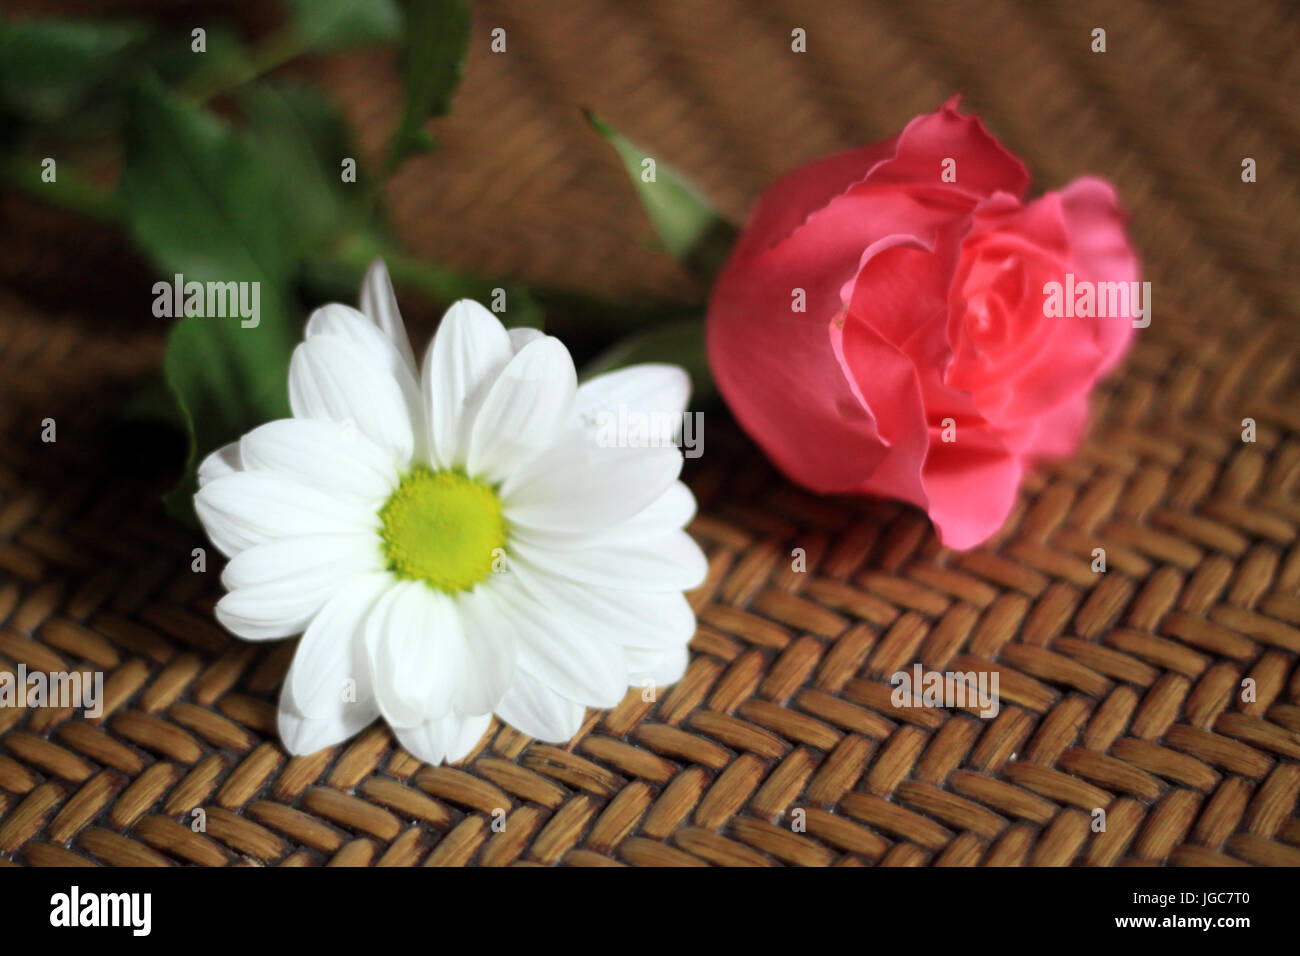 Flowering Flowers of Colour and Beauty Stock Photo